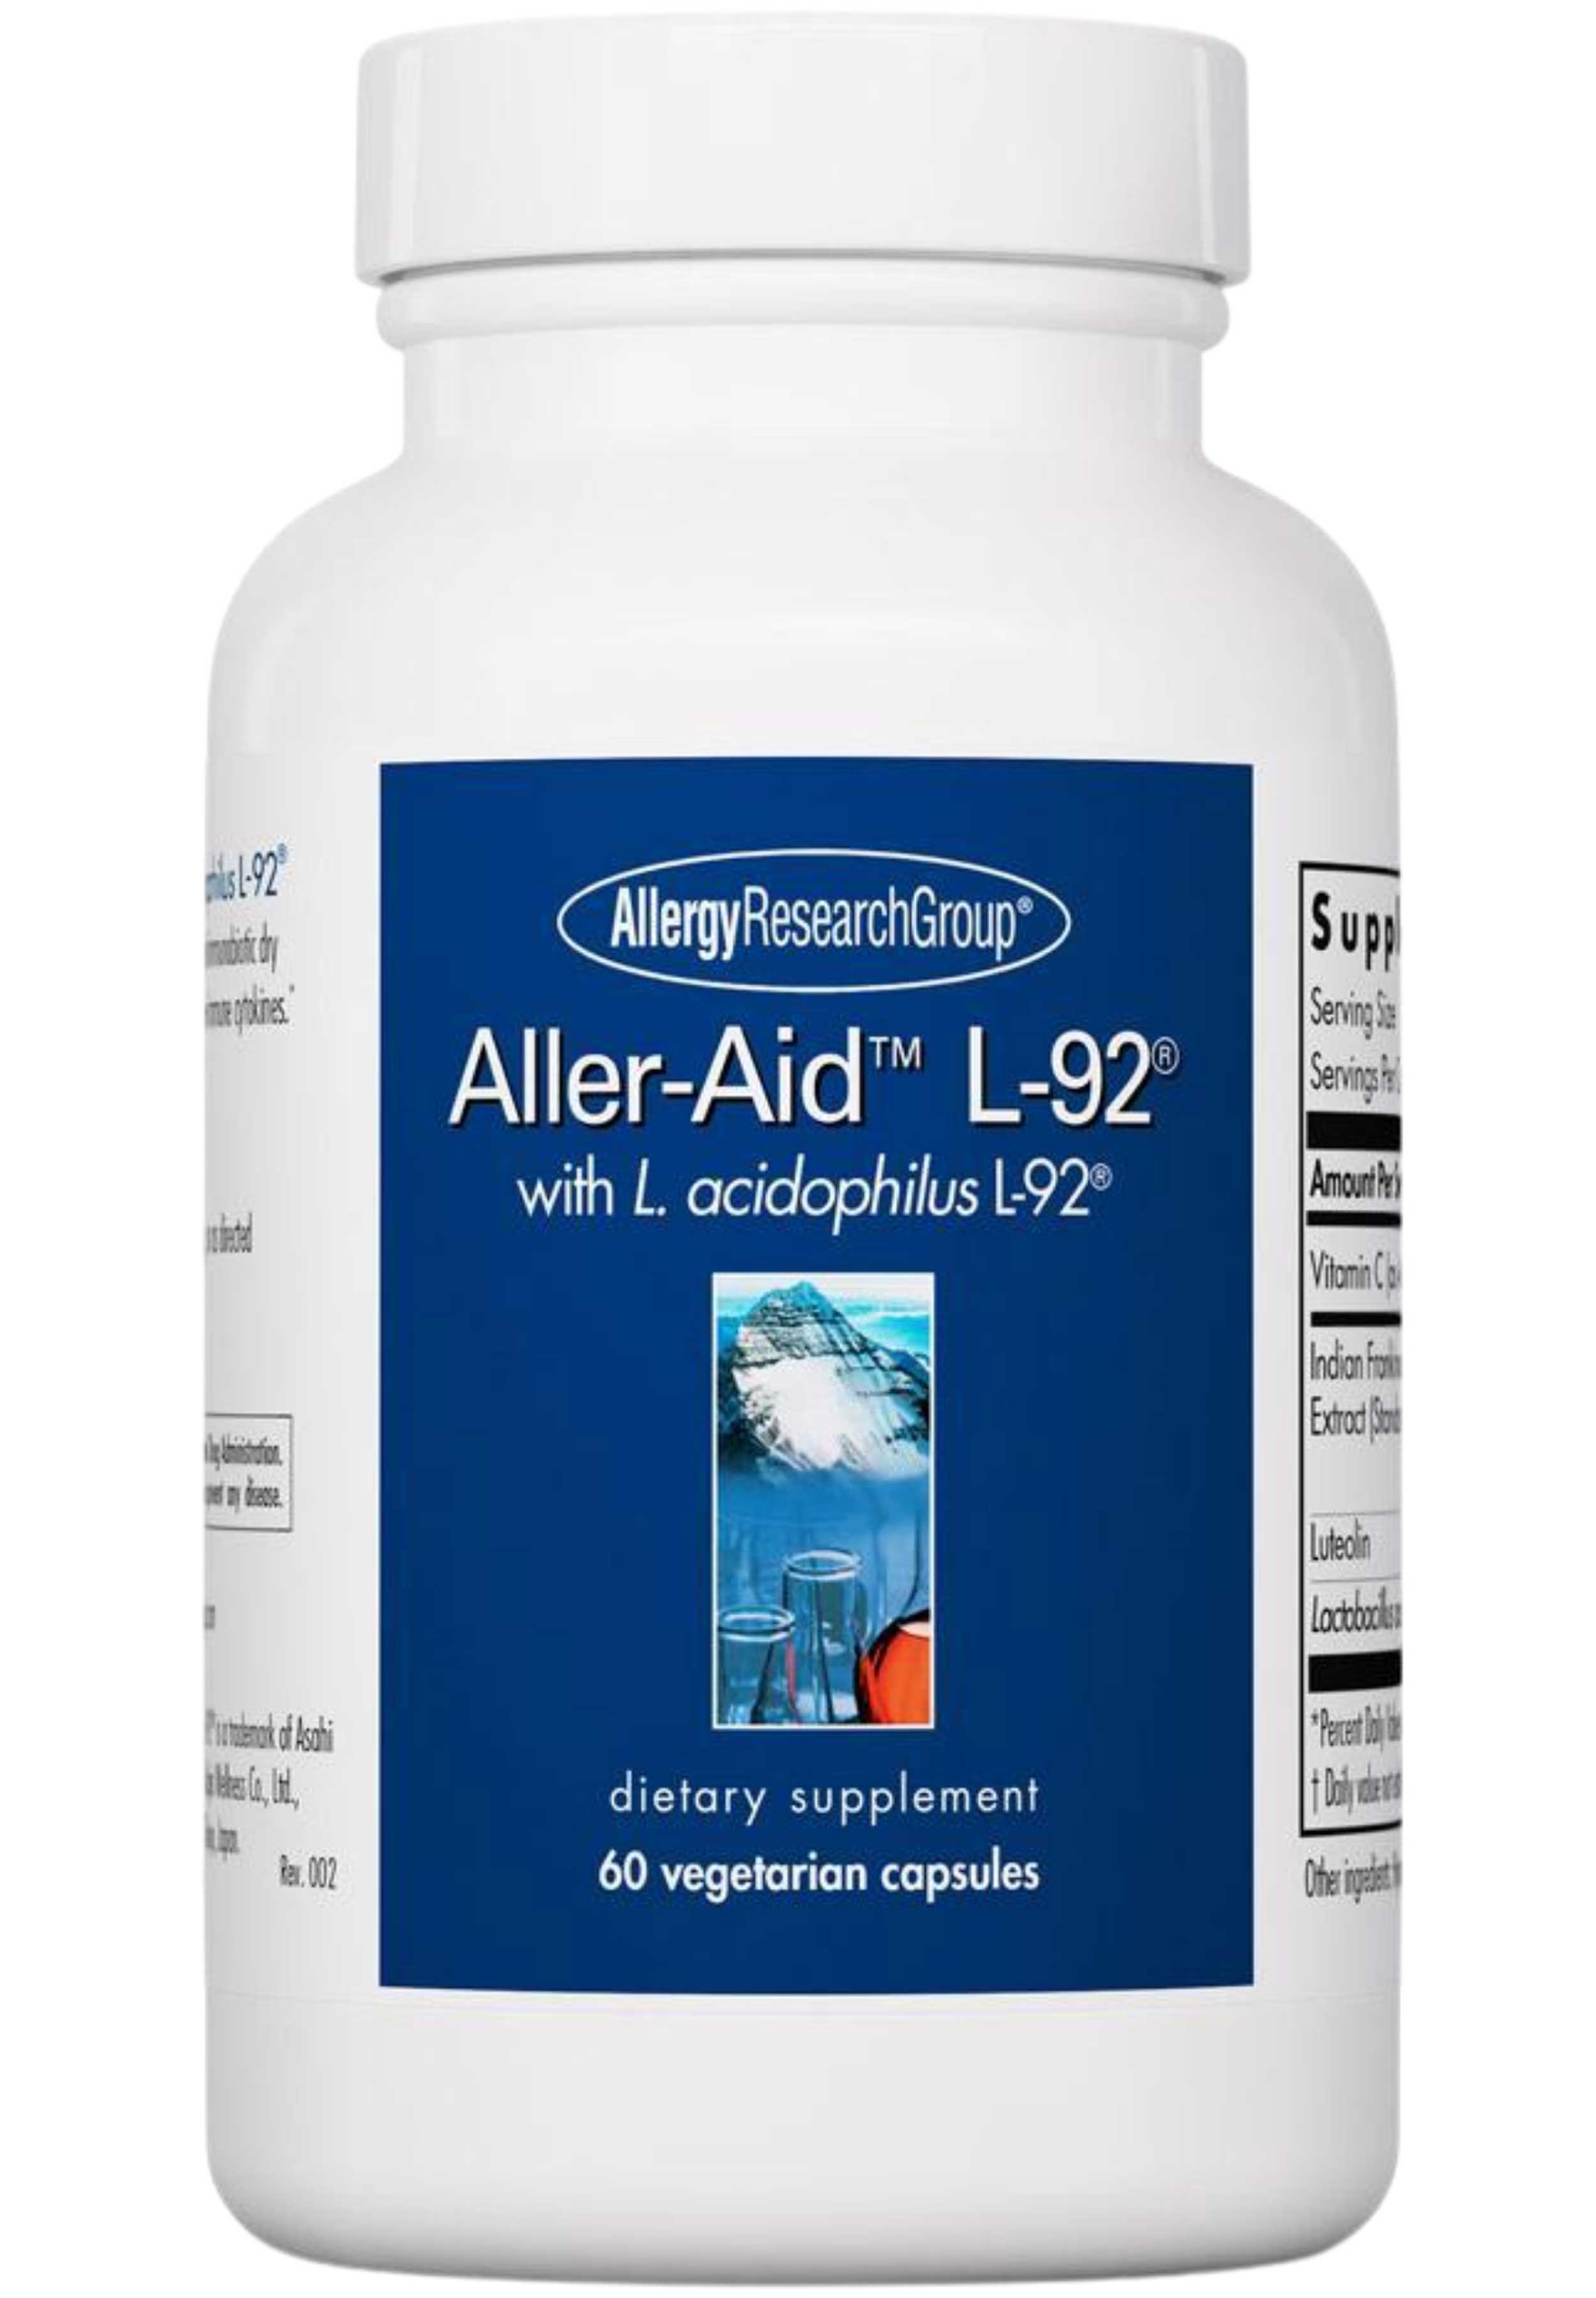 Allergy Research Group Aller-Aid L-92